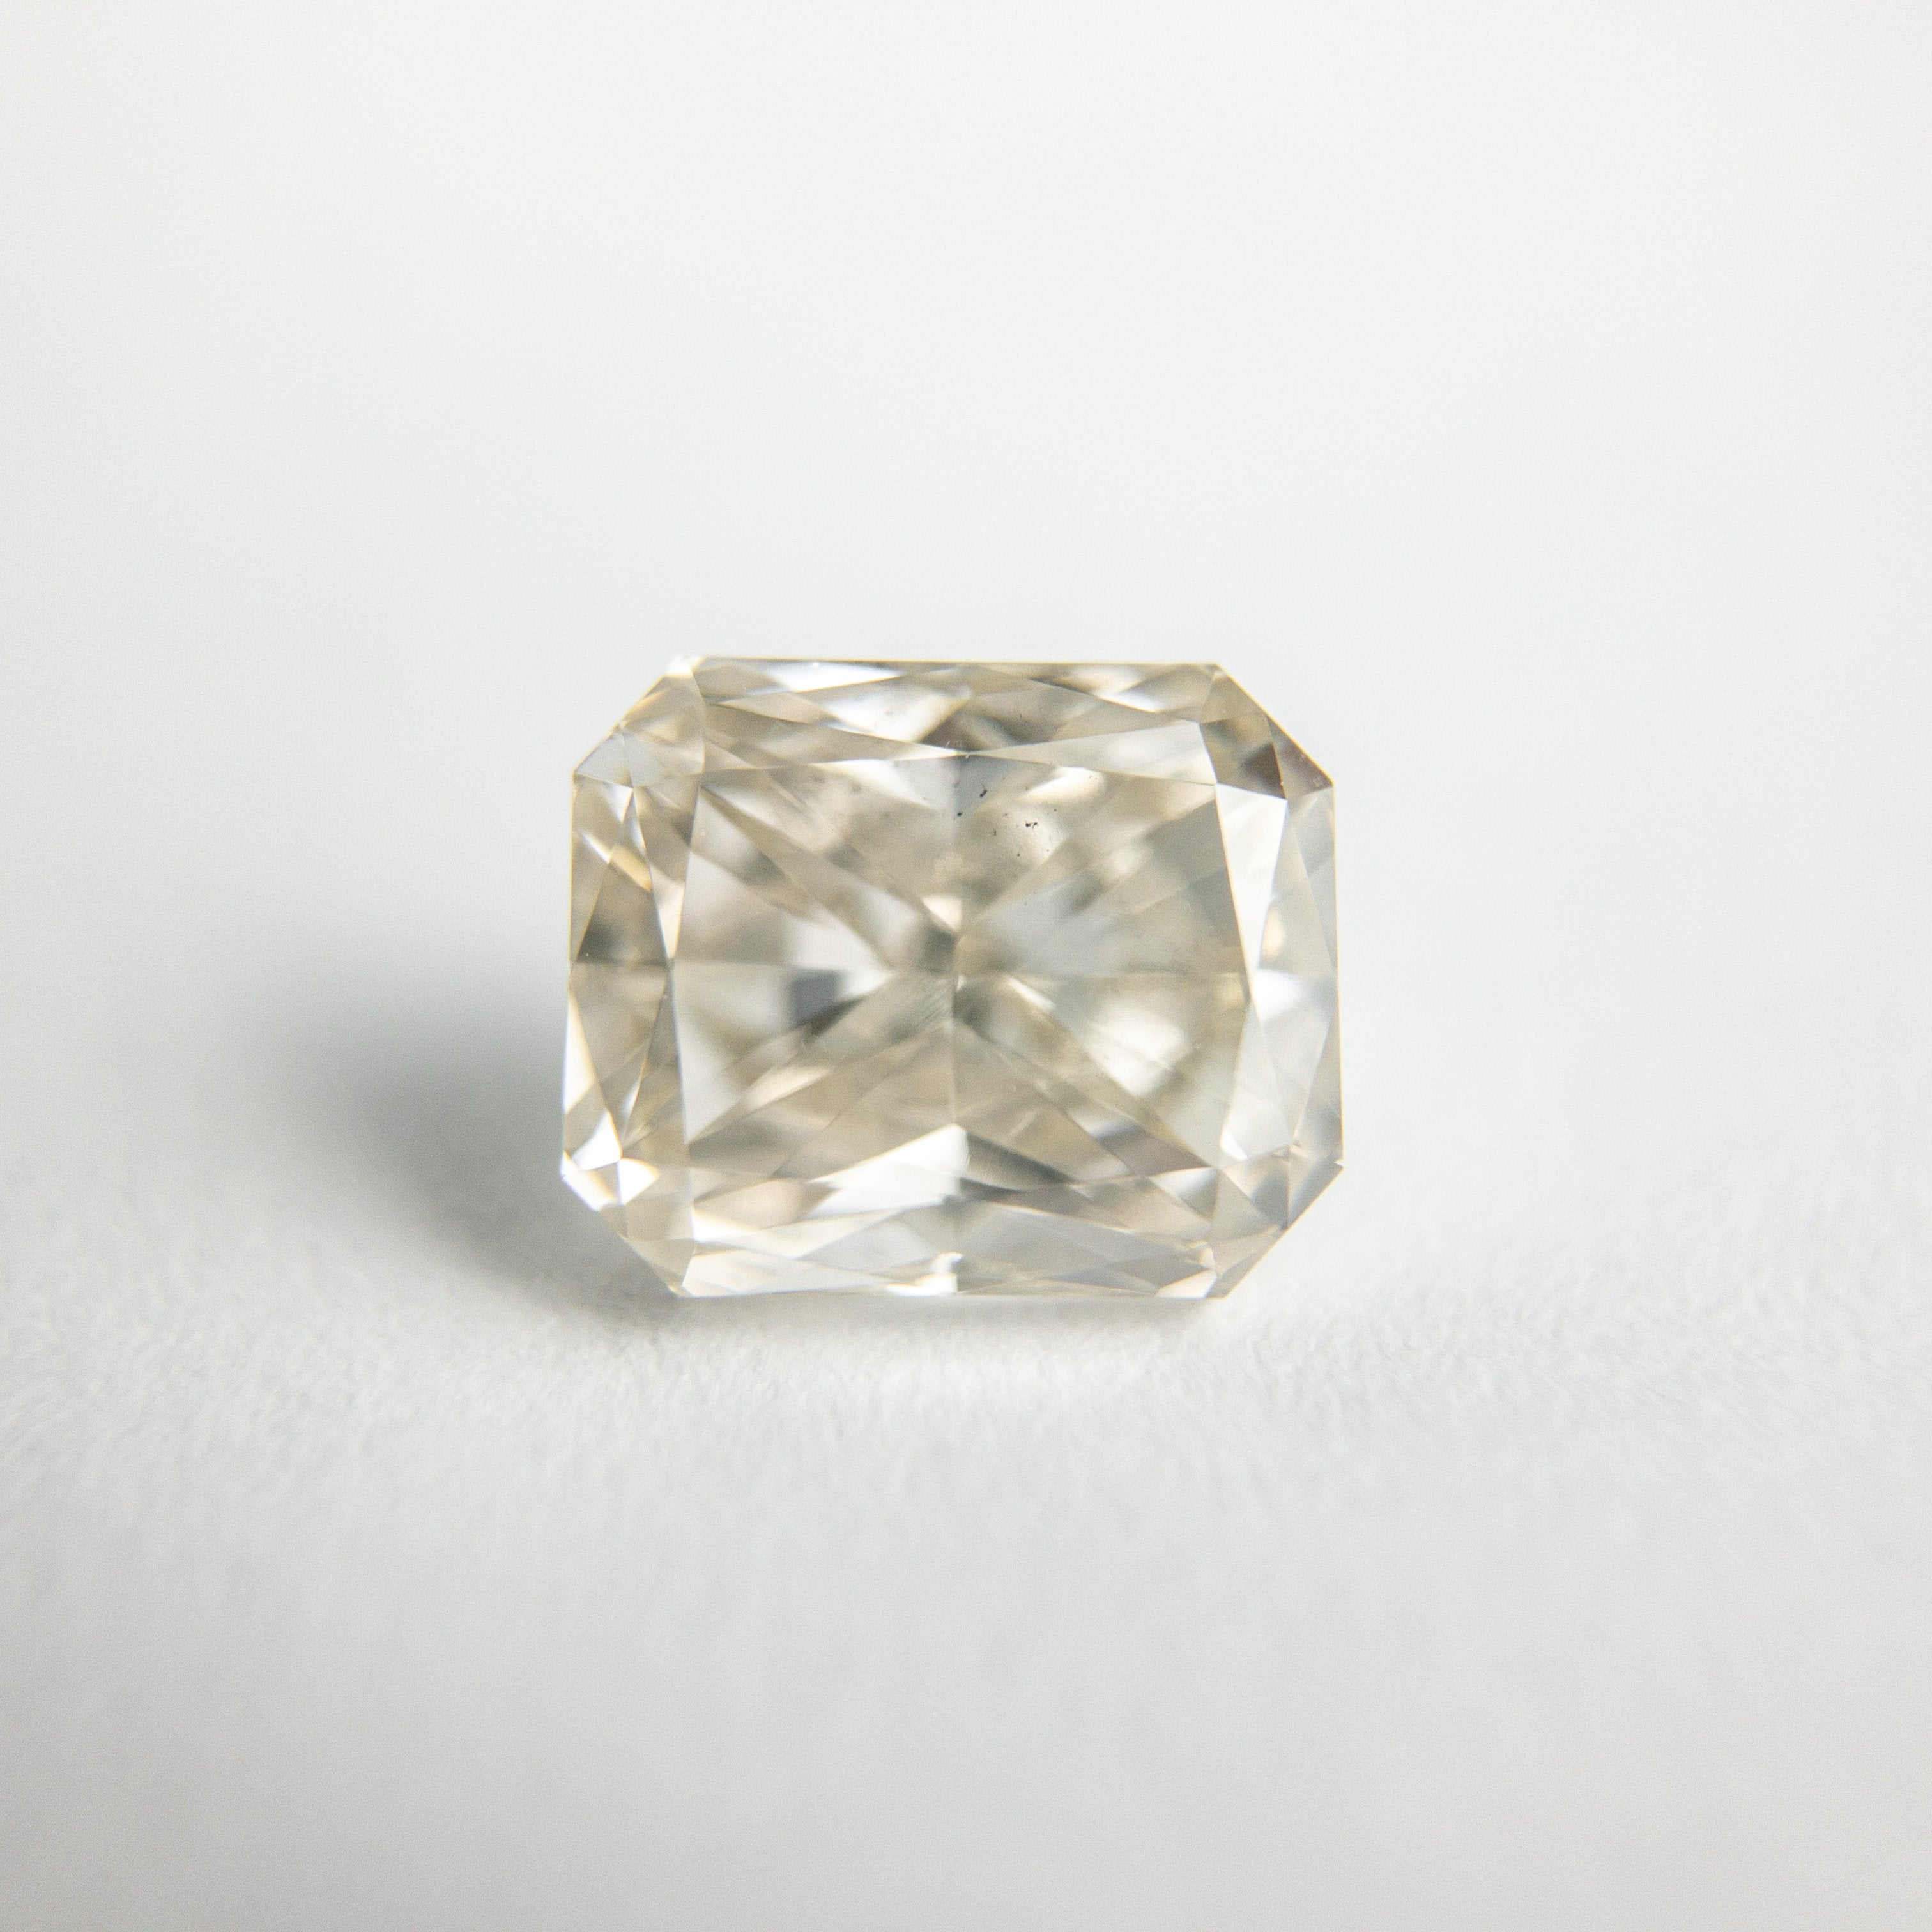 1.27ct 6.49x5.38x3.67mm Radiant Cut 18259-02 Hold D1936